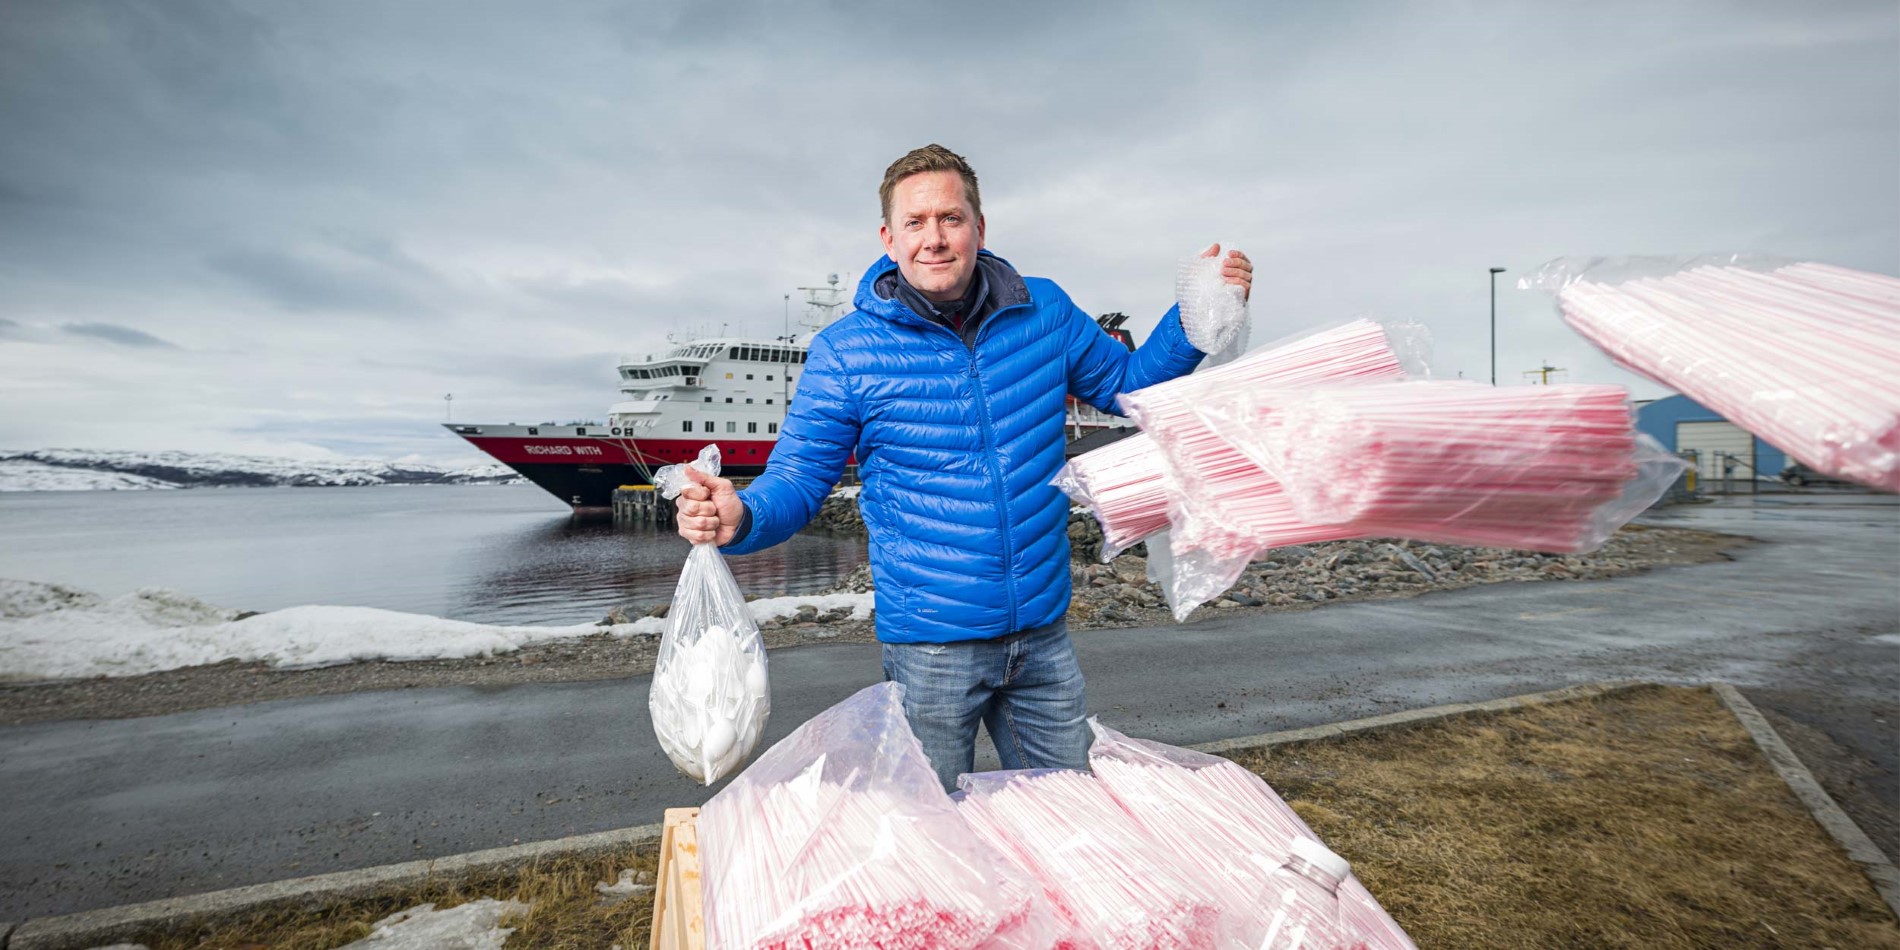 PLASTIC BAN: One million plastic straws a year are among the single use plastic items that will removed from all Hurtigruten ships this summer, as the company imposes a ban on single use plastic. Hurtigruten CEO Daniel Skjeldam, Hotel Manager Kristian Skar and rest of Hurtigruten employees are already removing plastic items from MS Richard With (in the background) and other Hurtigruten ships. 